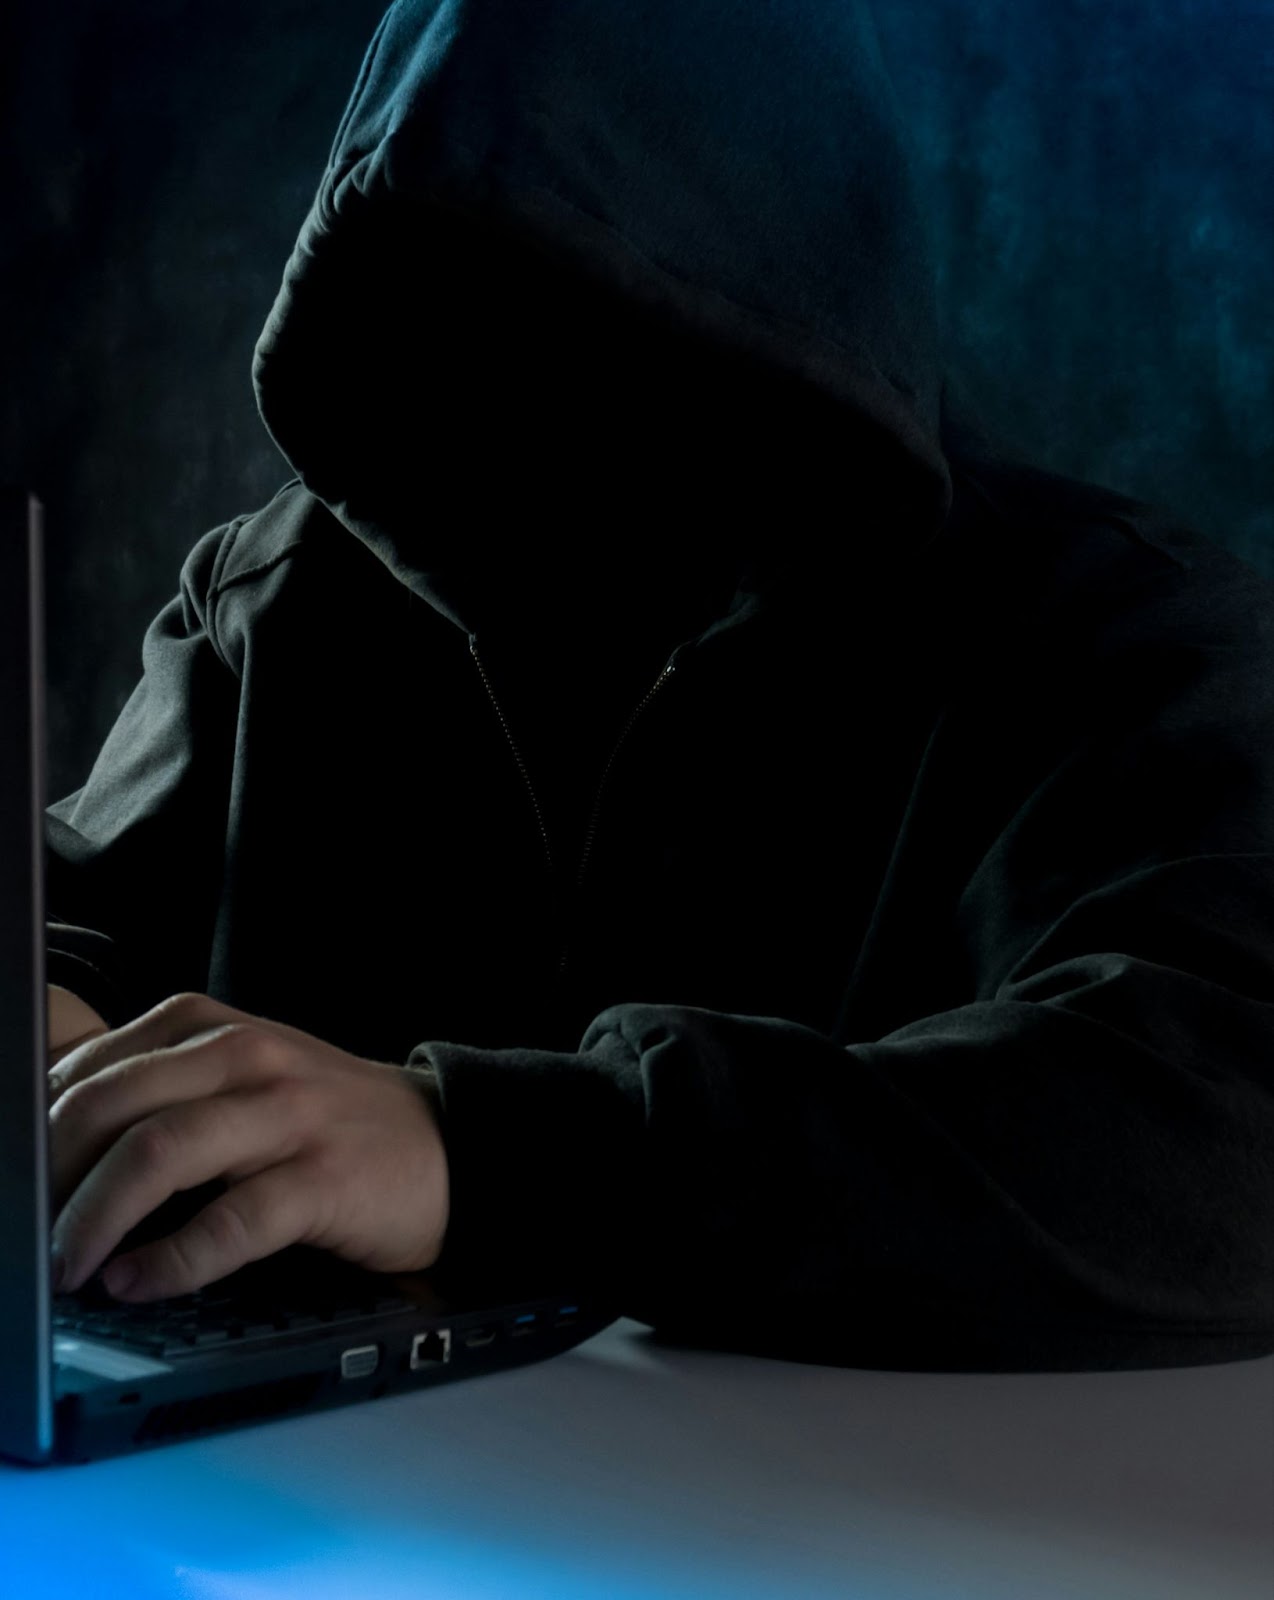 A shadowy figure wearing a black hoodie is typing on a laptop.